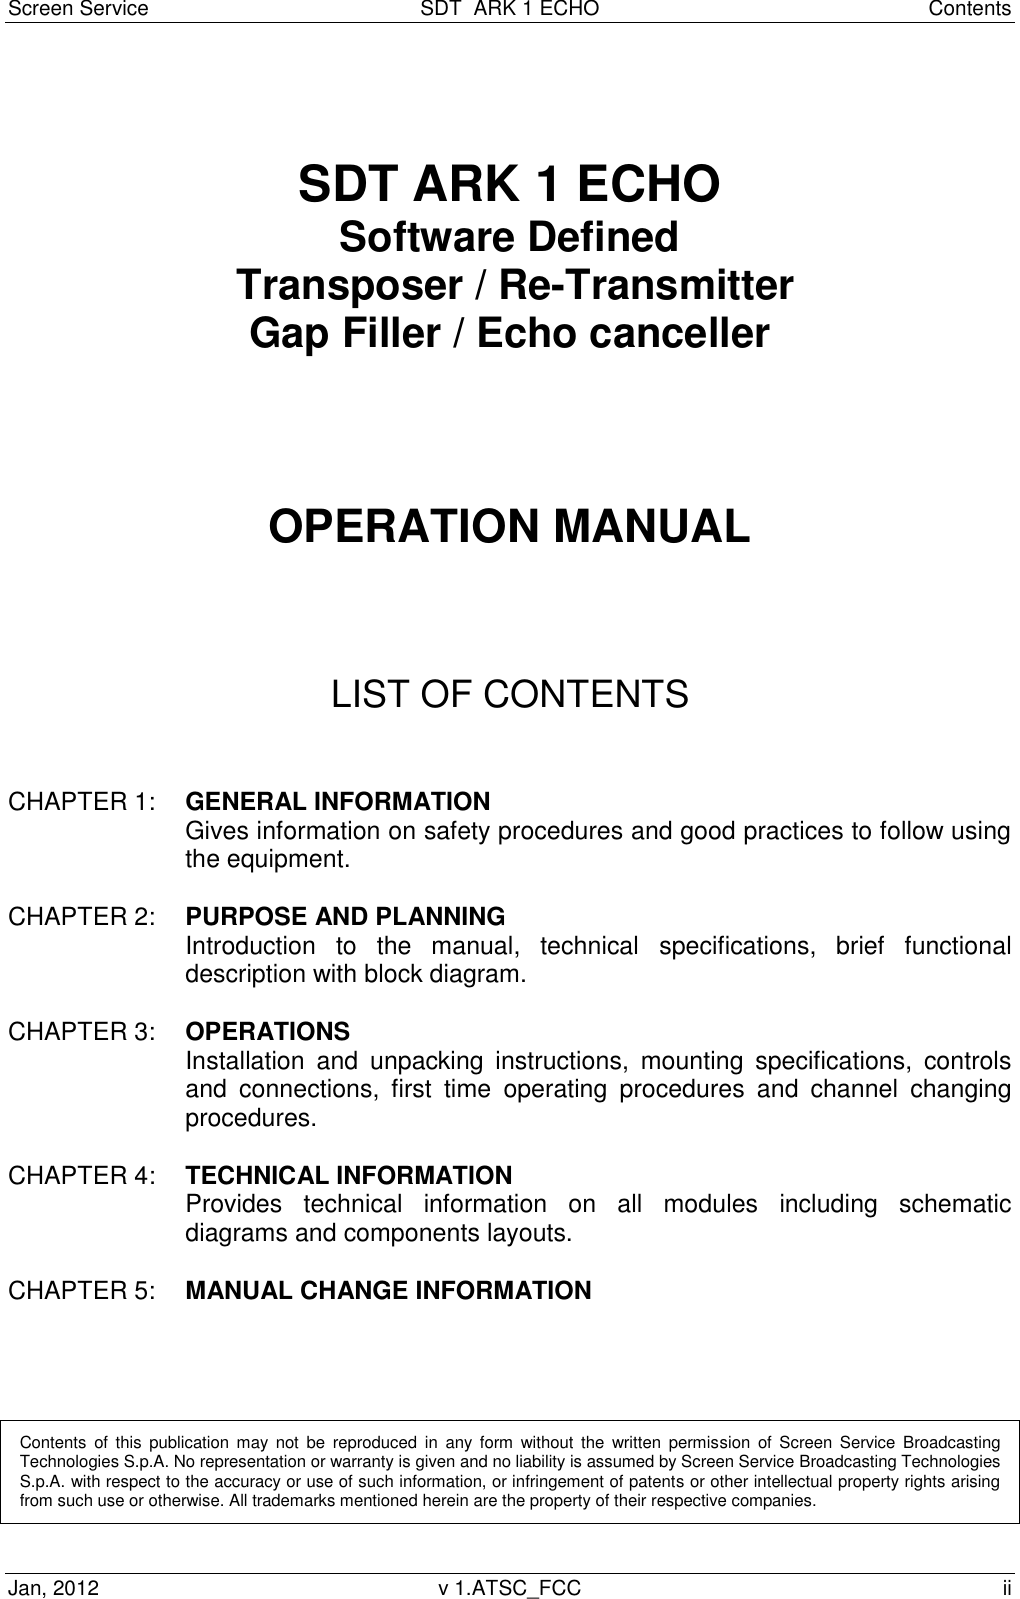 Screen Service  SDT  ARK 1 ECHO  Contents Jan, 2012  v 1.ATSC_FCC  ii   SDT ARK 1 ECHO Software Defined  Transposer / Re-Transmitter Gap Filler / Echo canceller       OPERATION MANUAL      LIST OF CONTENTS   CHAPTER 1:  GENERAL INFORMATION Gives information on safety procedures and good practices to follow using the equipment.  CHAPTER 2:  PURPOSE AND PLANNING Introduction  to  the  manual,  technical  specifications,  brief  functional description with block diagram.  CHAPTER 3:  OPERATIONS Installation  and  unpacking  instructions,  mounting  specifications,  controls and  connections,  first  time  operating  procedures  and  channel  changing procedures.  CHAPTER 4:  TECHNICAL INFORMATION Provides  technical  information  on  all  modules  including  schematic diagrams and components layouts.  CHAPTER 5:   MANUAL CHANGE INFORMATION      Contents  of  this  publication  may  not  be  reproduced  in  any  form  without  the  written  permission  of  Screen  Service  Broadcasting Technologies S.p.A. No representation or warranty is given and no liability is assumed by Screen Service Broadcasting Technologies S.p.A. with respect to the accuracy or use of such information, or infringement of patents or other intellectual property rights arising from such use or otherwise. All trademarks mentioned herein are the property of their respective companies.  